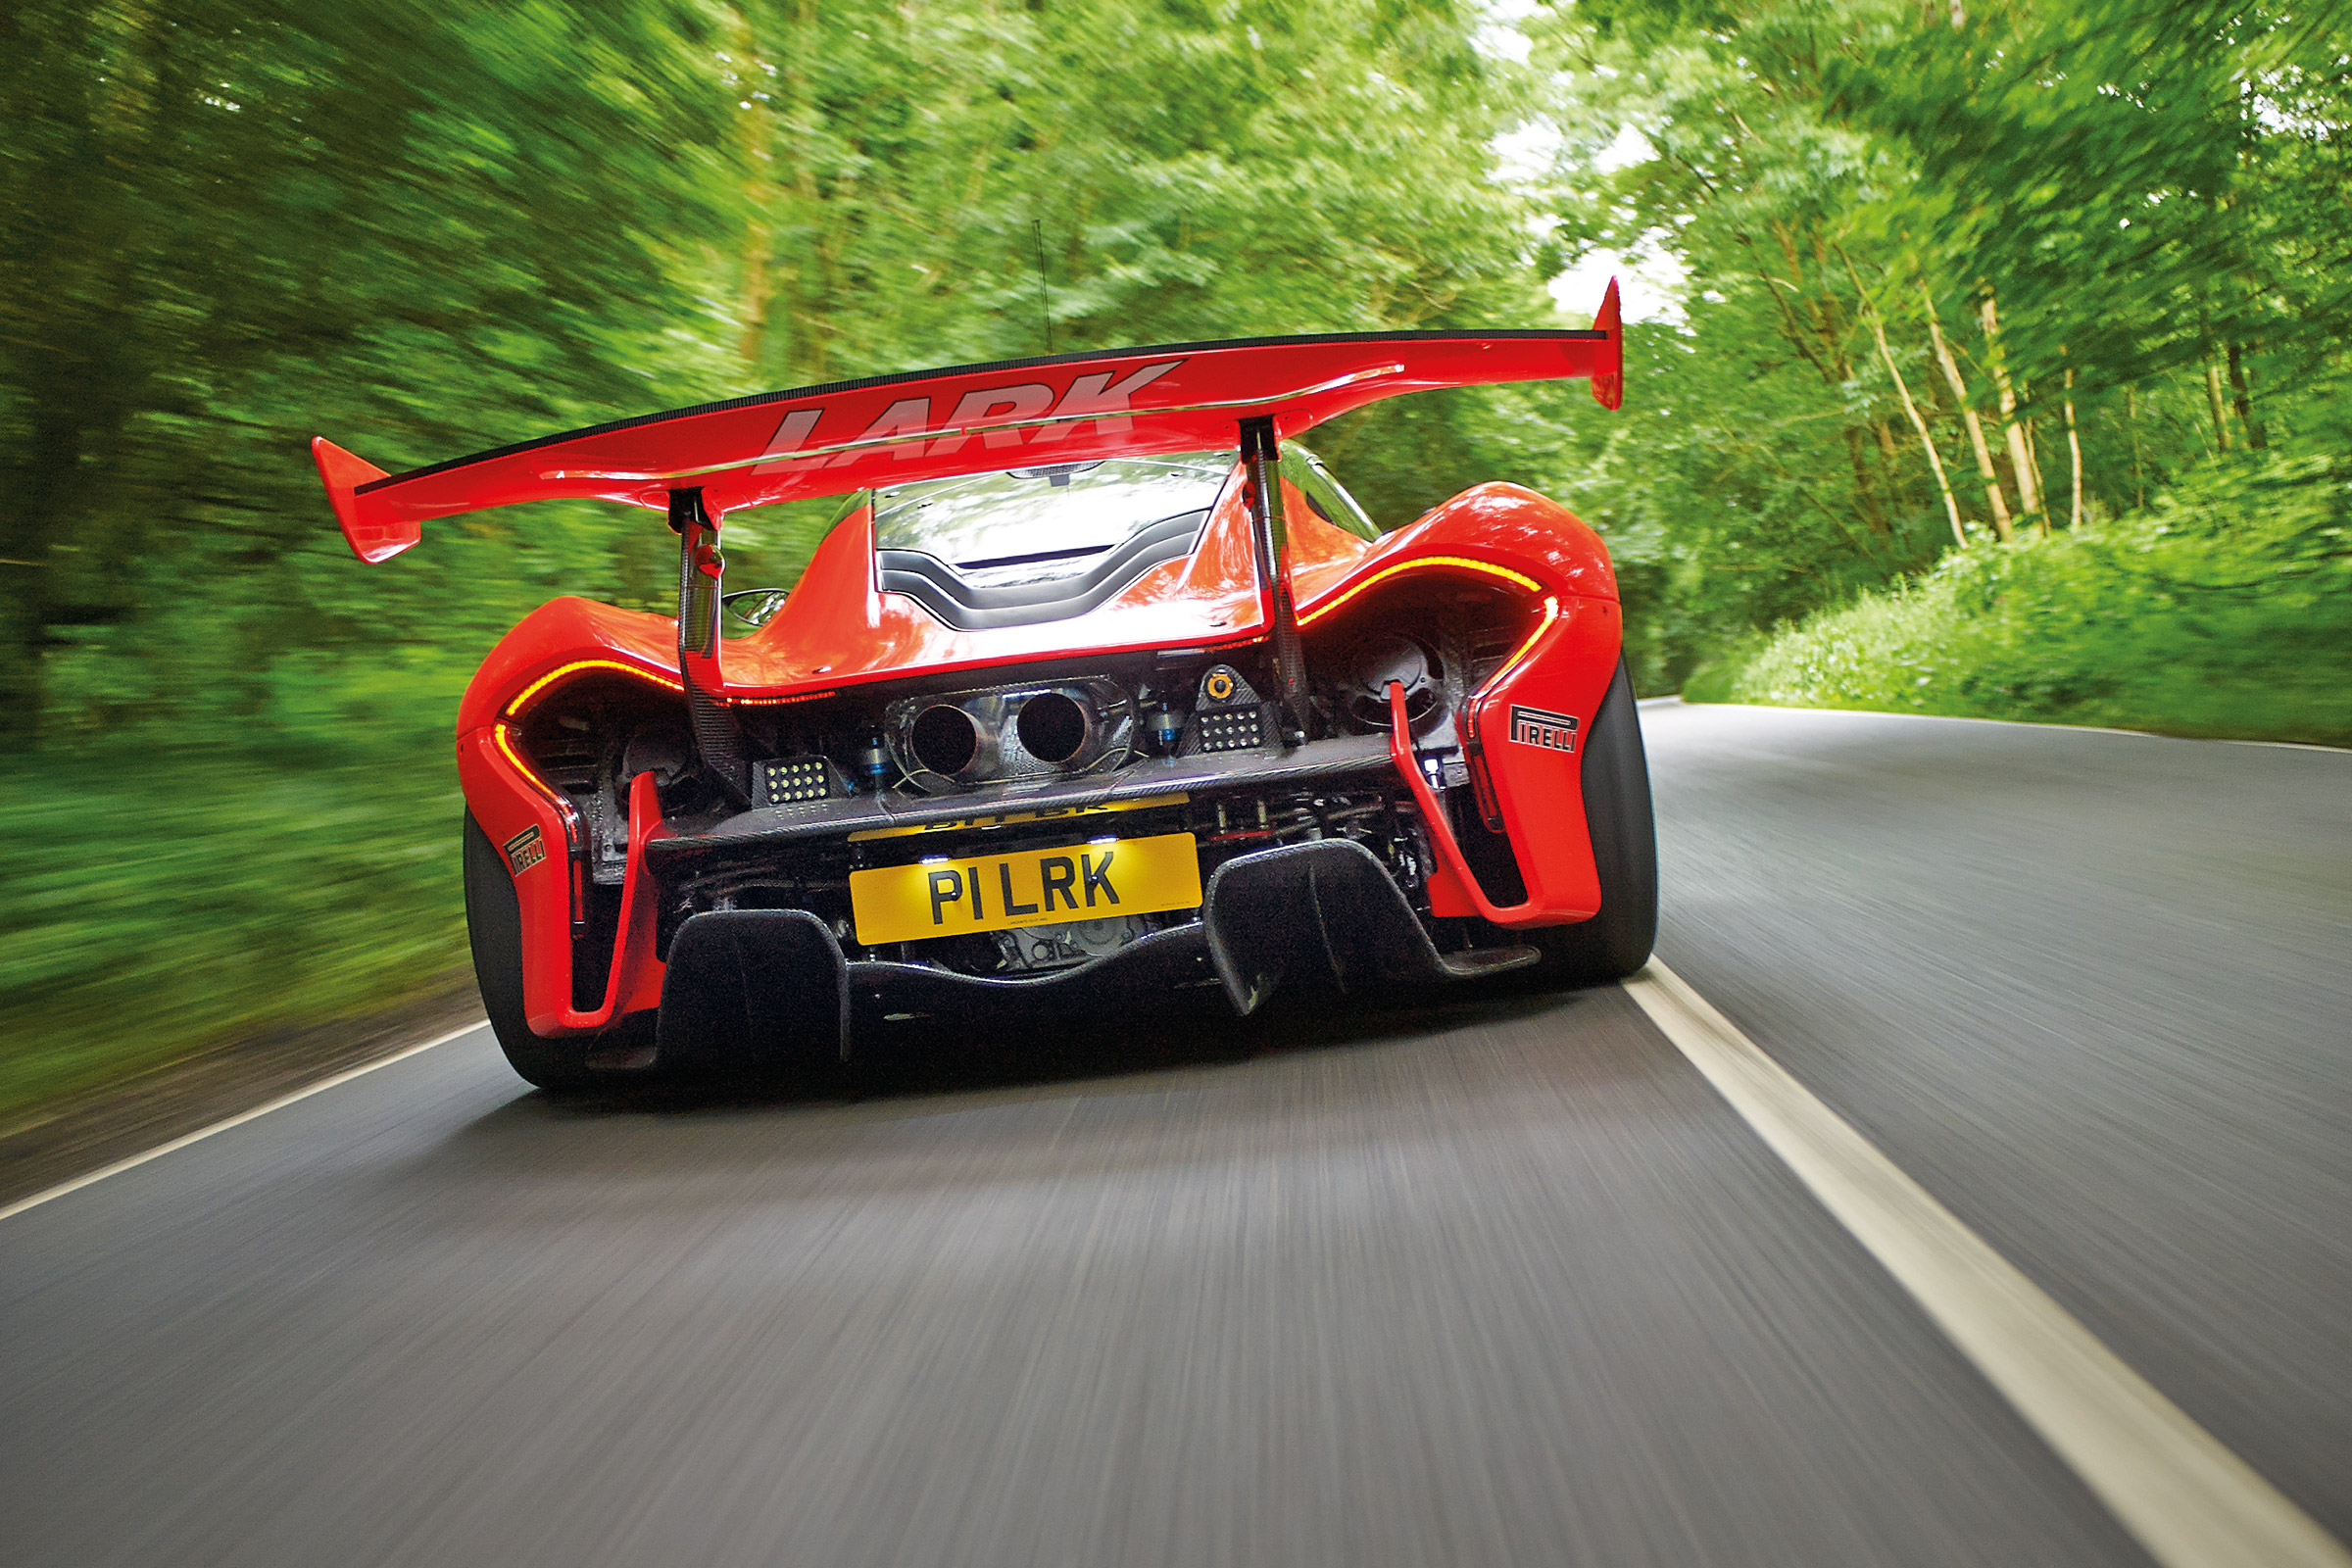 Mclaren P1 Gtr Review - We Take To The Streets In Converted Road-Legal  Racer | Evo